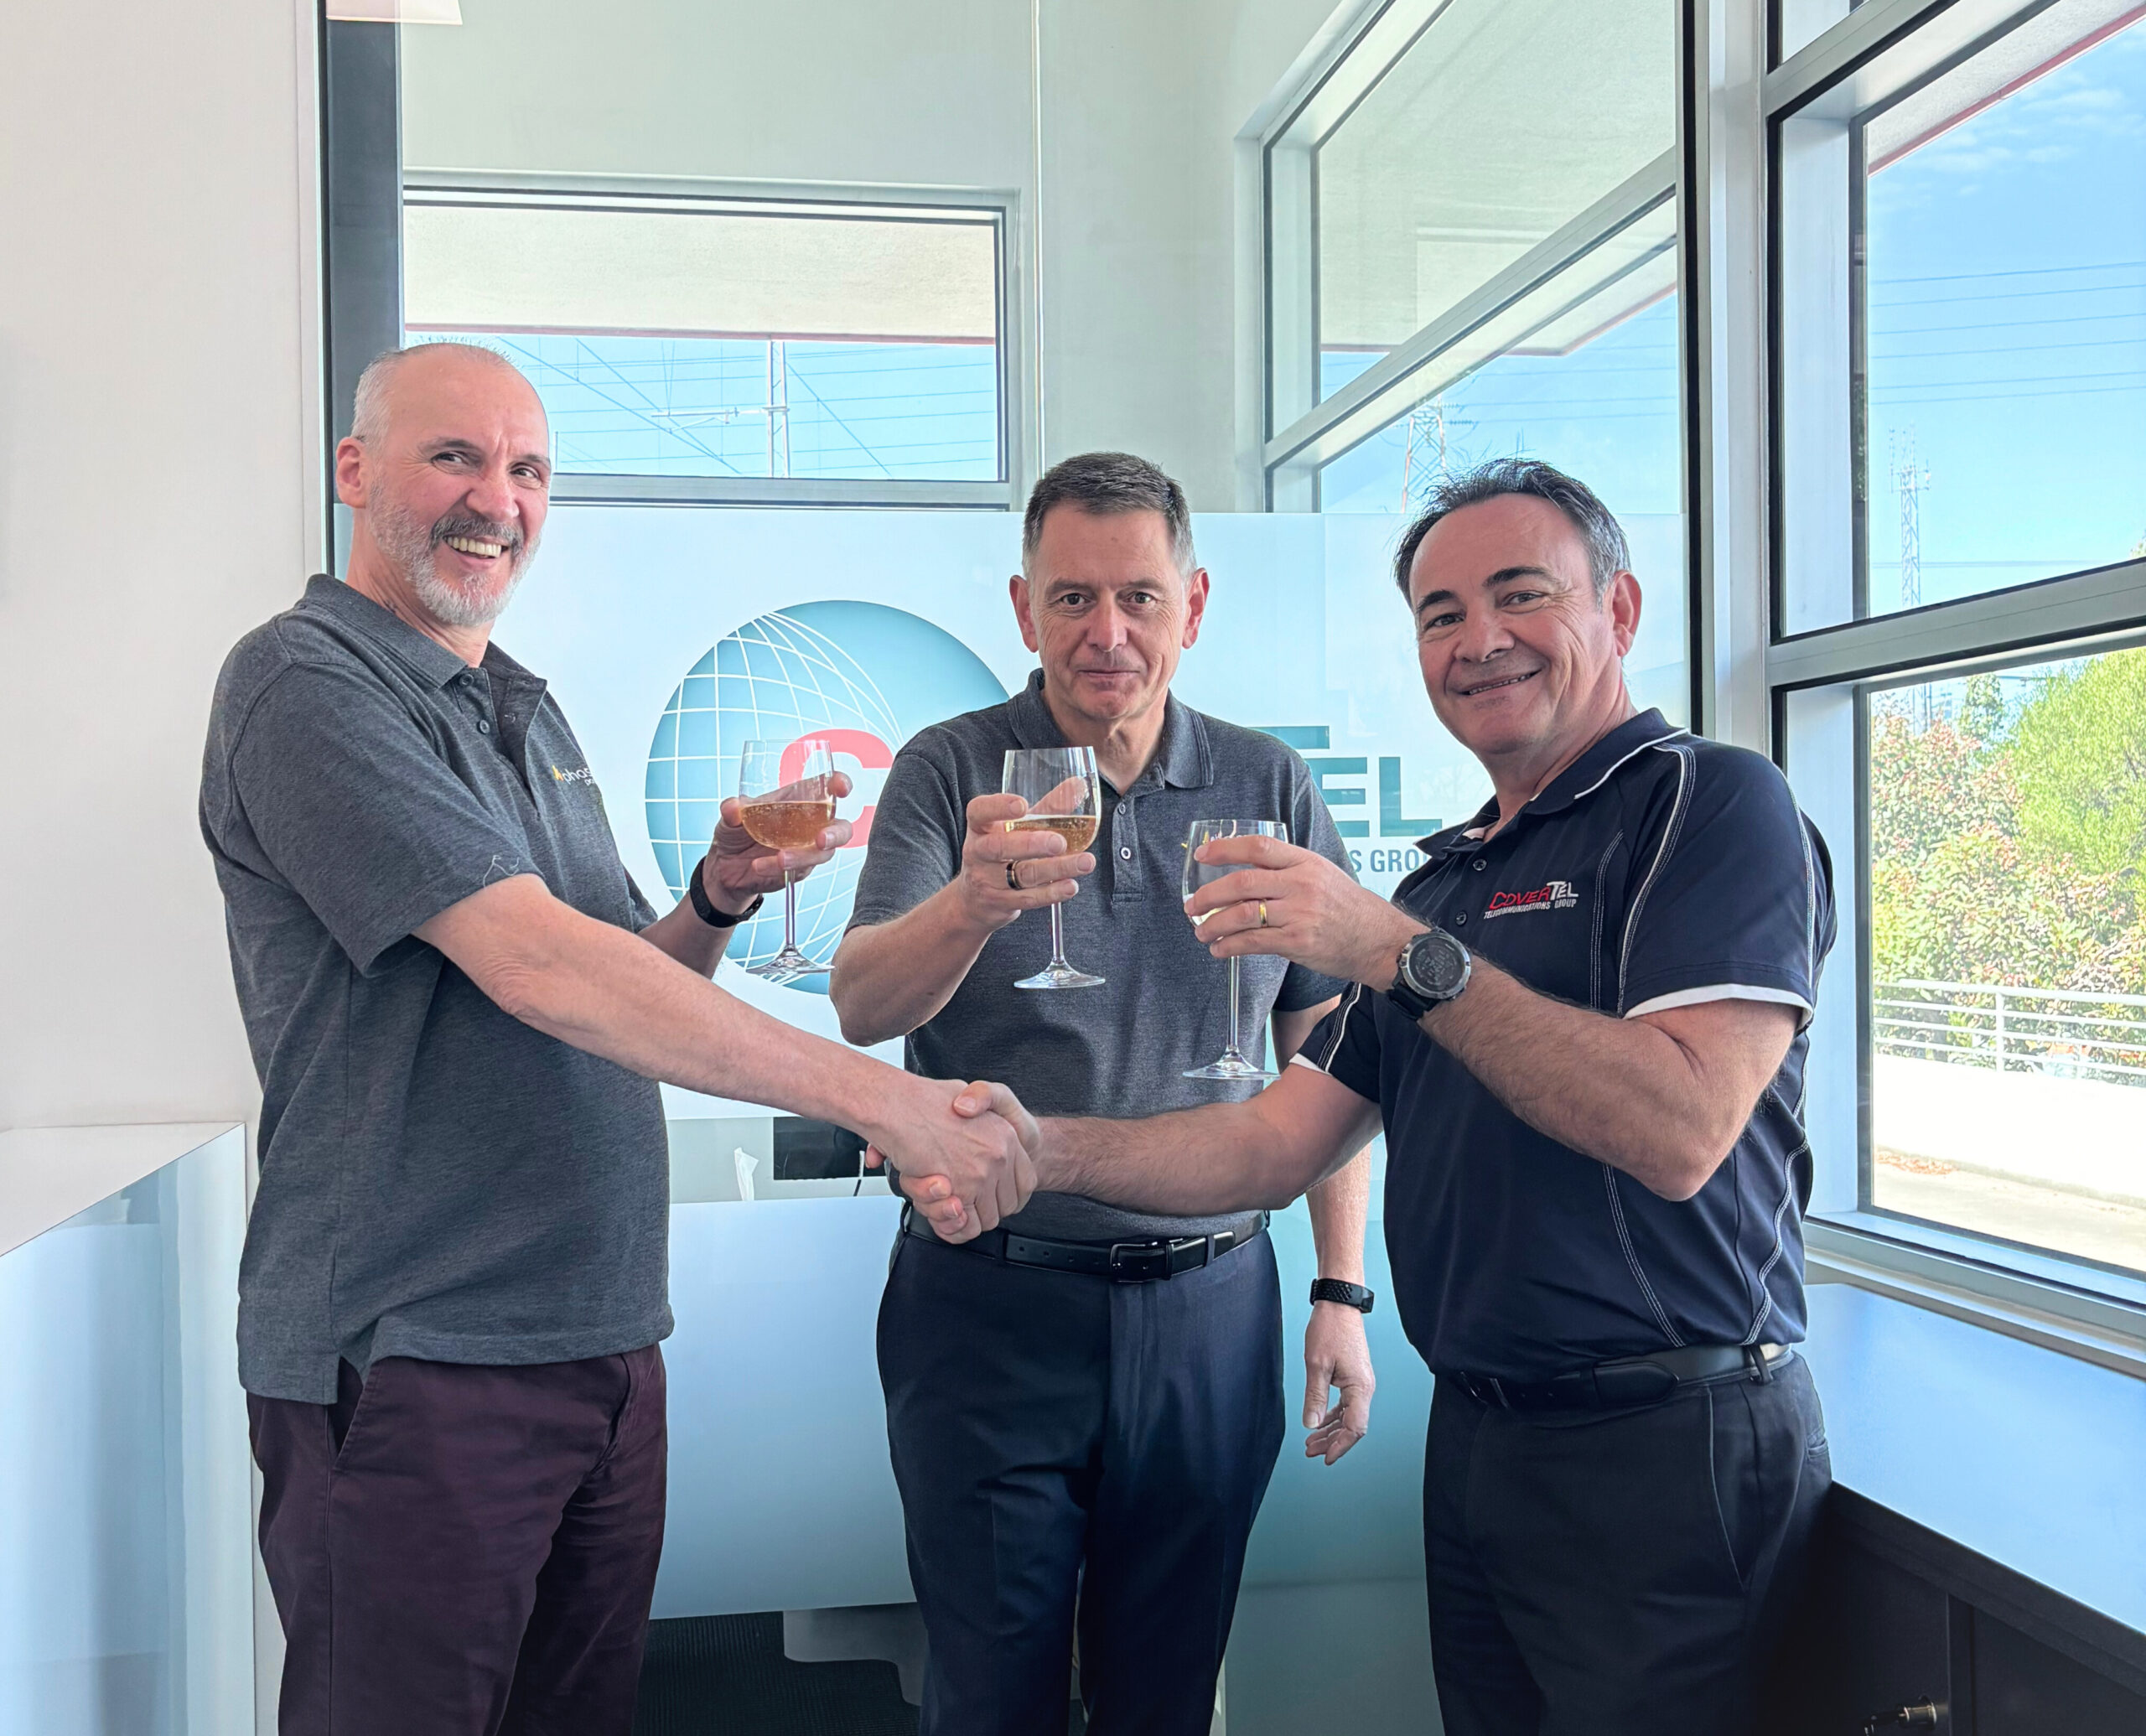 Bruno, Frank, and John raise a toast as Phase Pacific and CoverTel join forces.